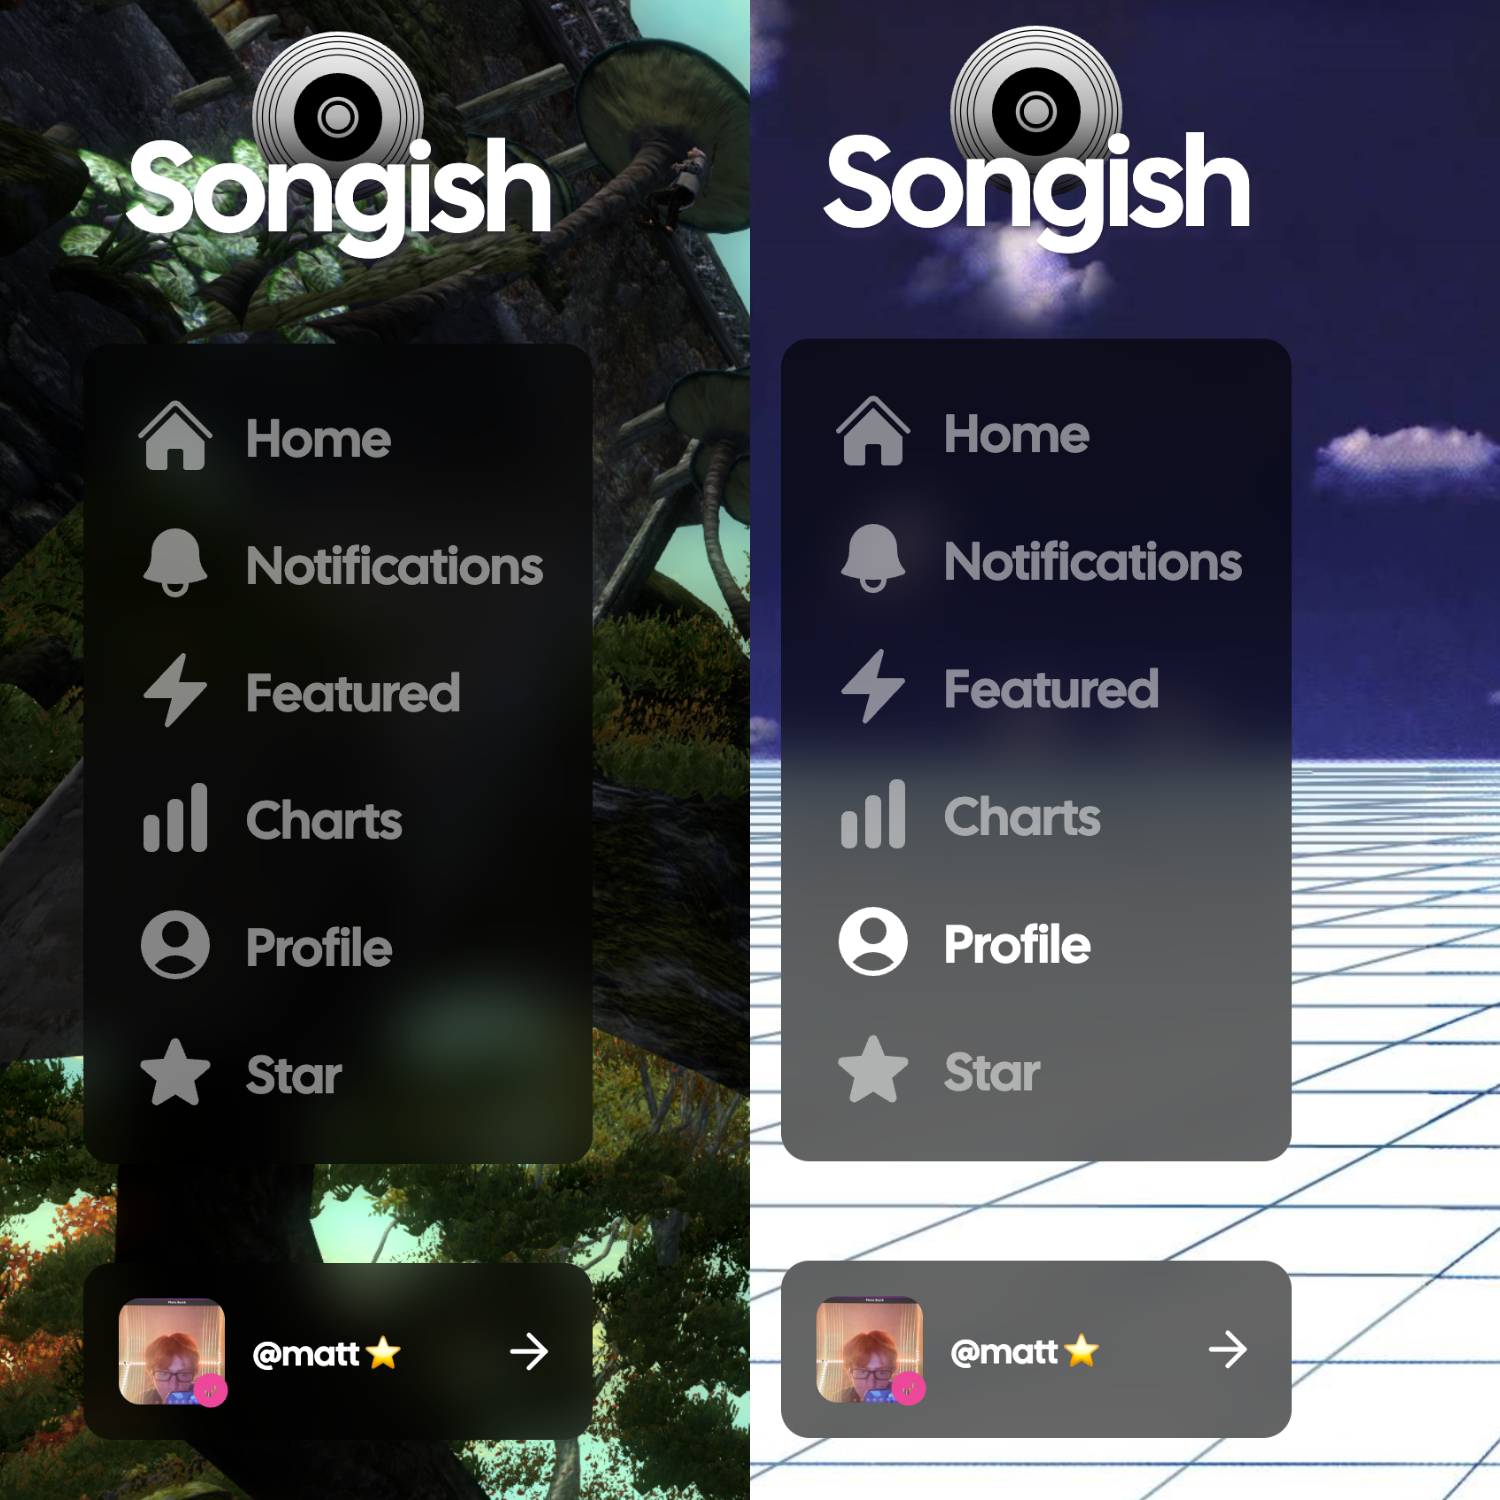 A screenshot showing the Songish sidebar twice, with two different custom backgrounds.